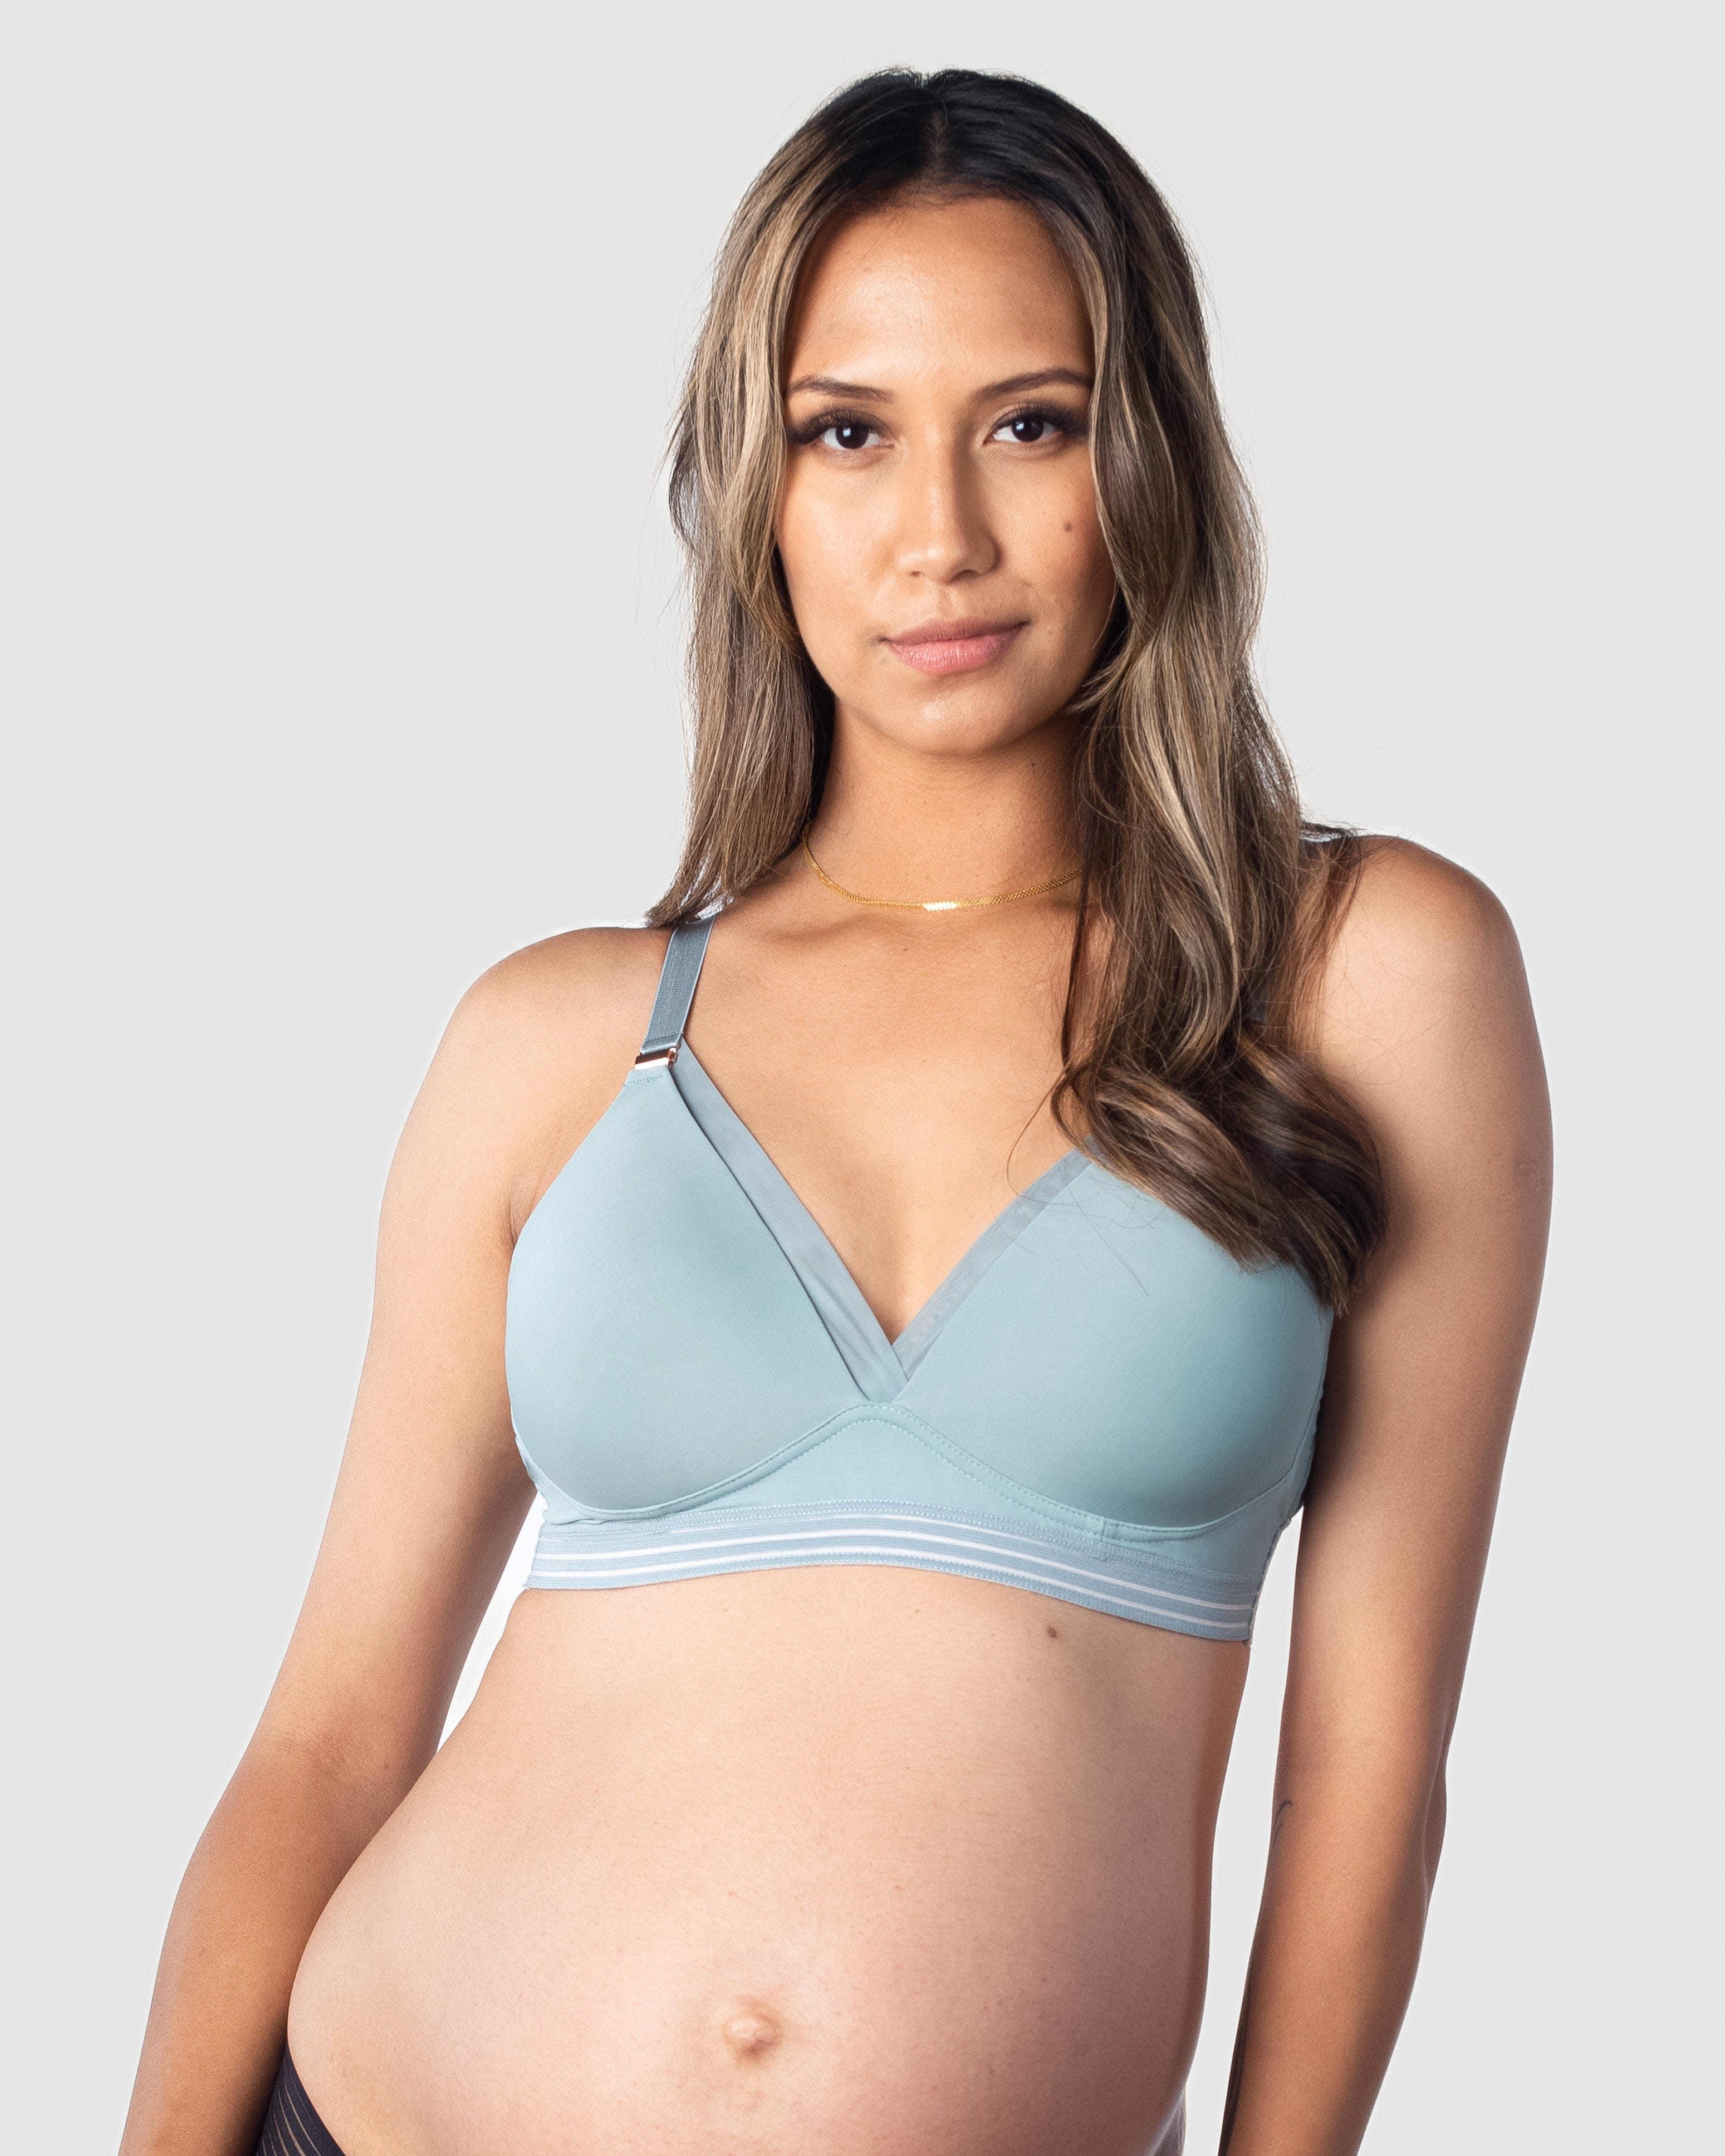 M&S 2 Pack Maternity Nursing Bras Cotton Full Cup 32C Non Wired